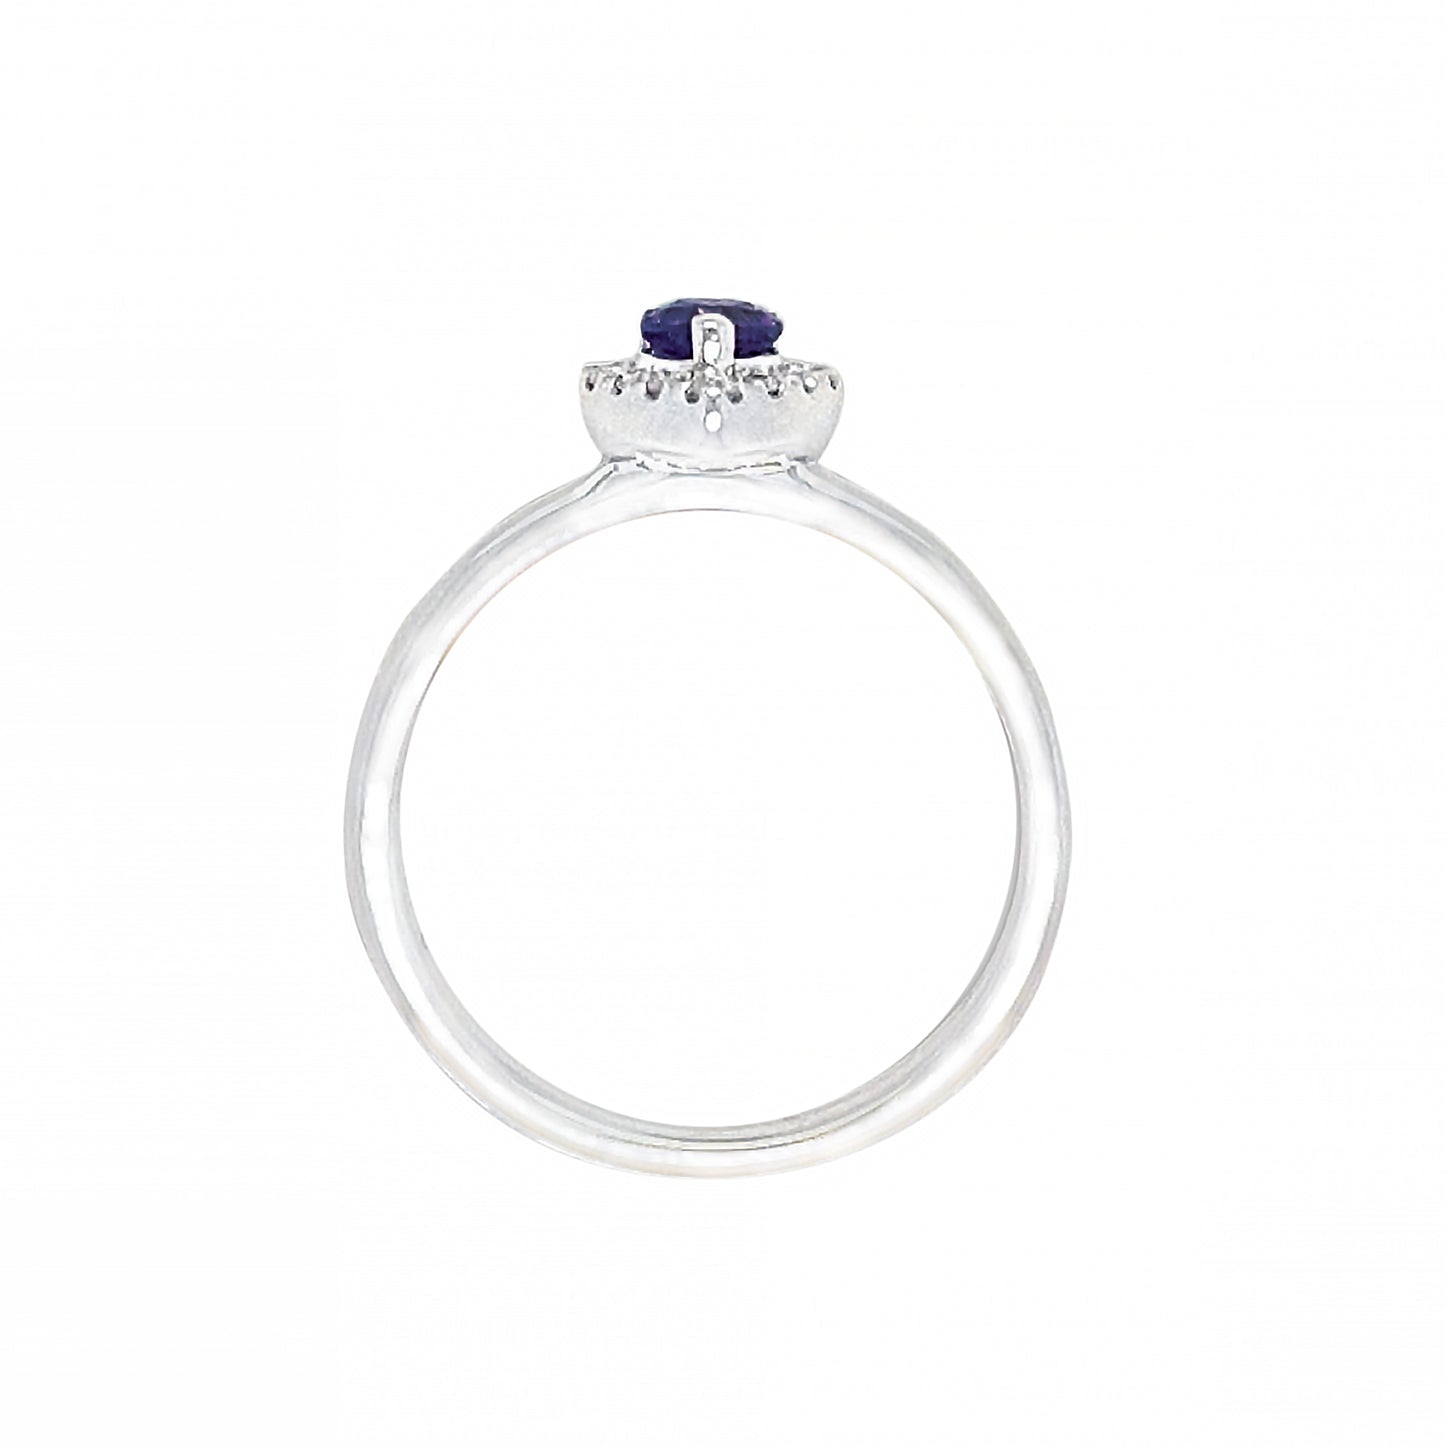 9ct White Gold Halo Sapphire Ring